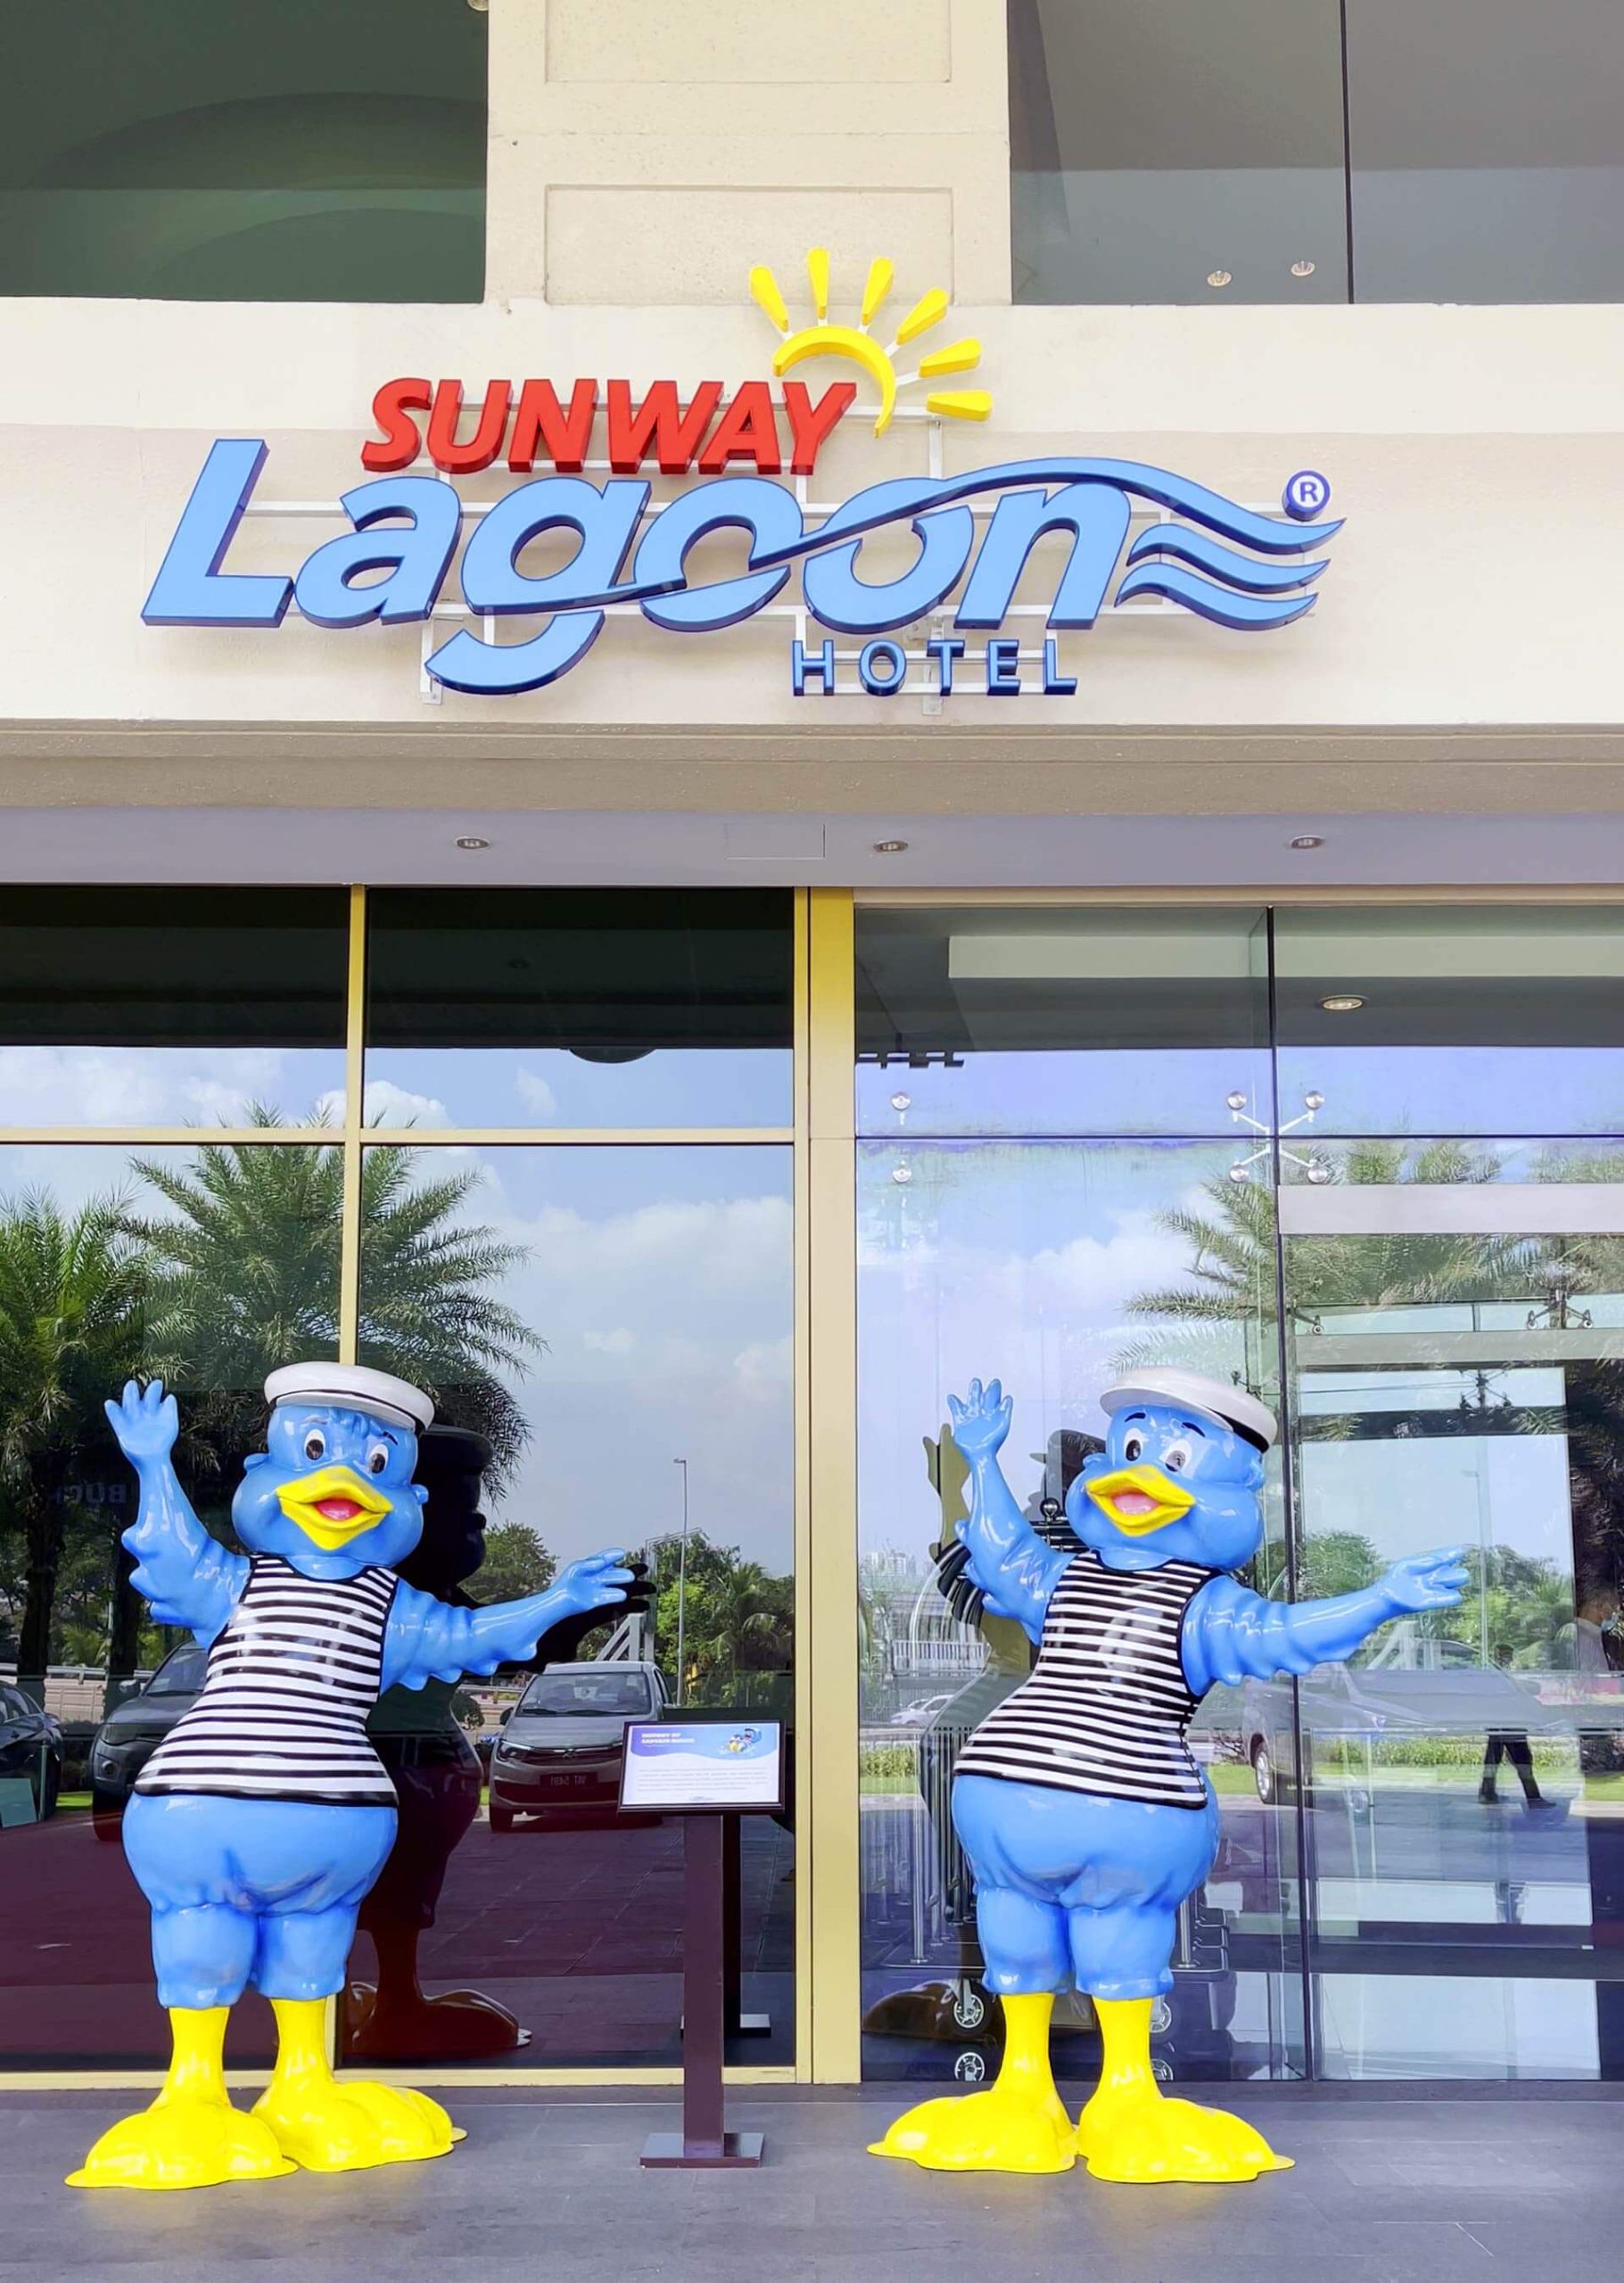 Be welcomed by our Sunway Lagoon Hotel’s mascots upon your arrival.